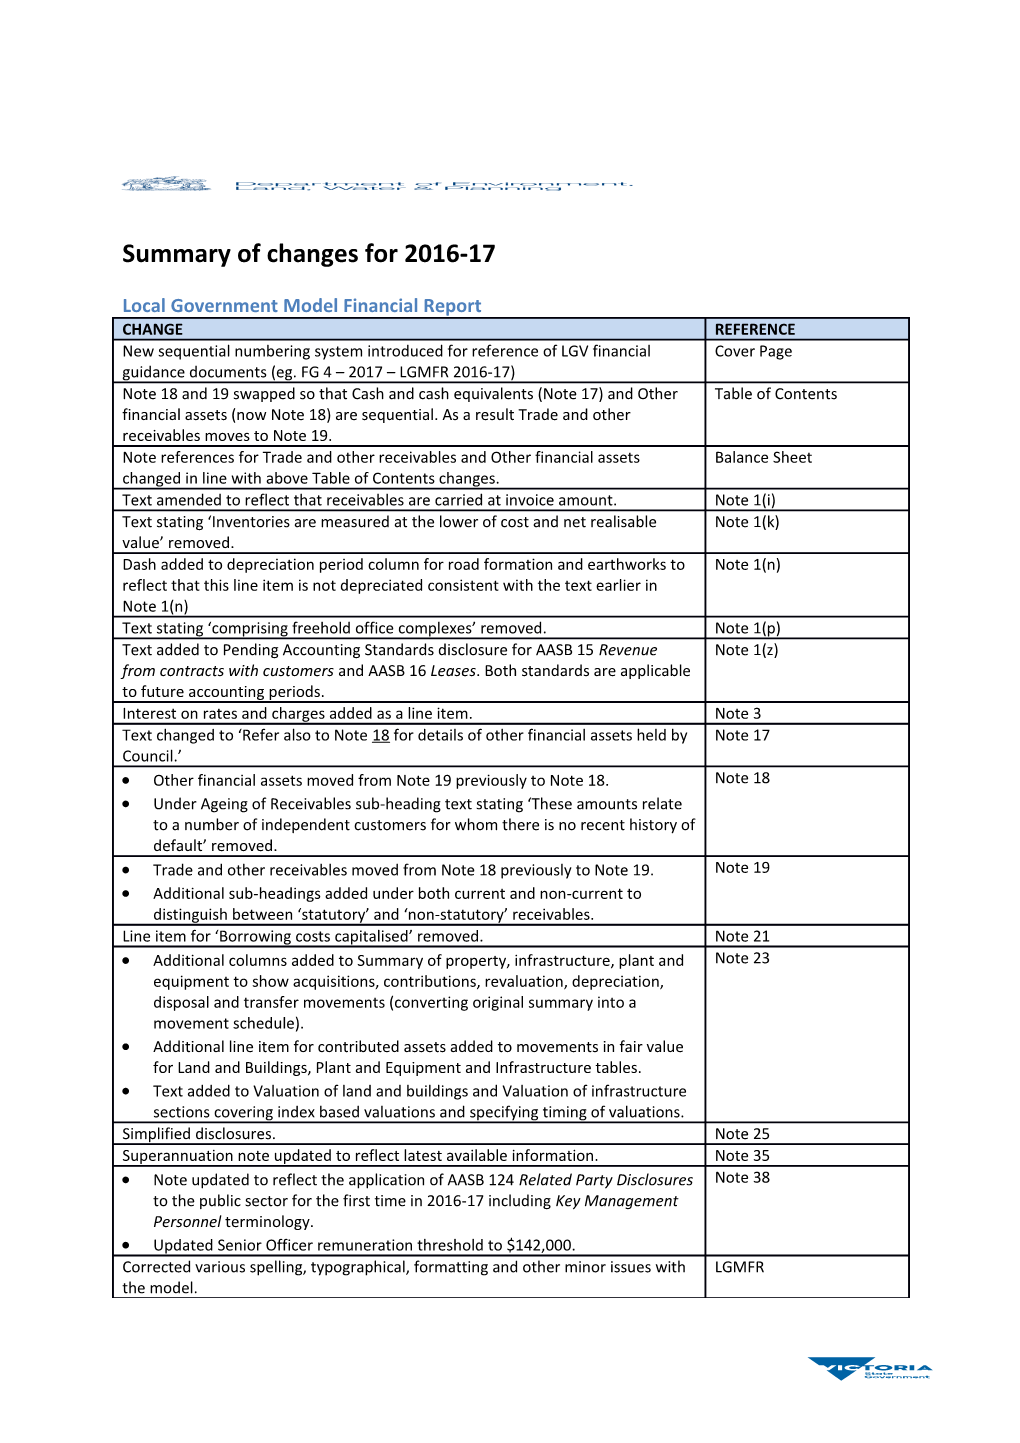 LGMFR Summary of Changes for 2016-17